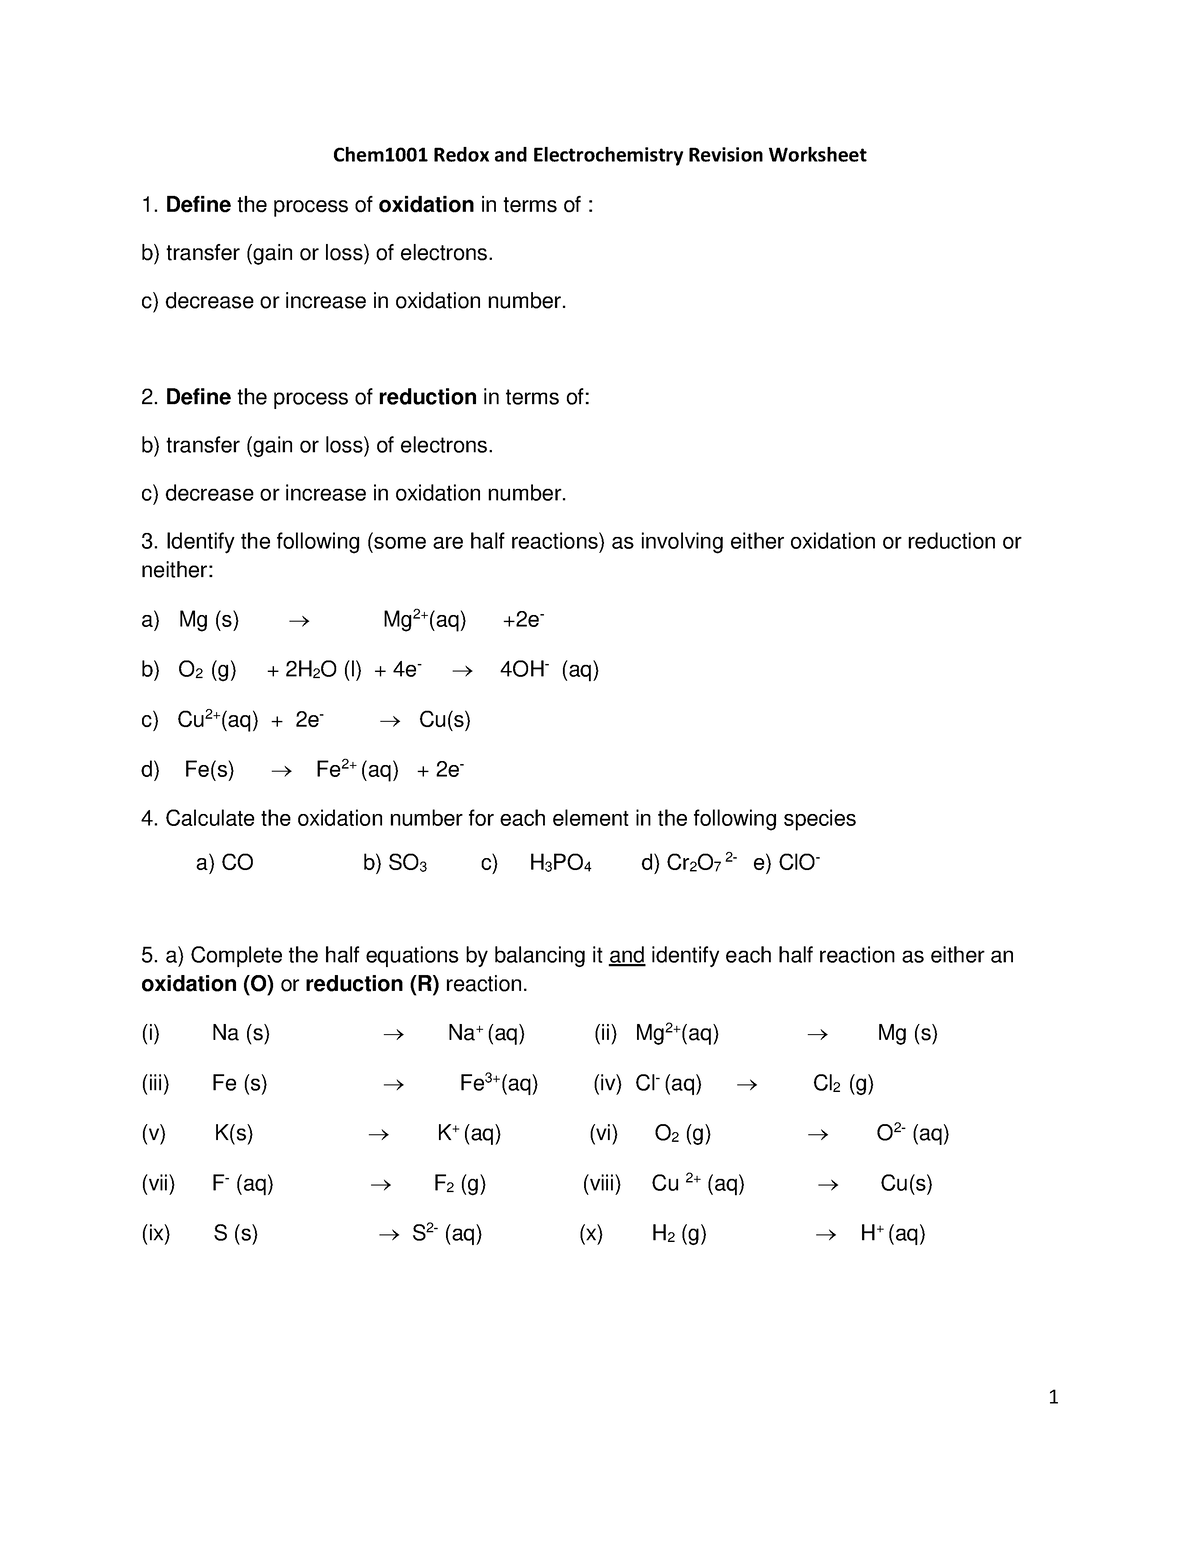 Redox revision worksheet Chem1001 Redox and Electrochemistry Revision